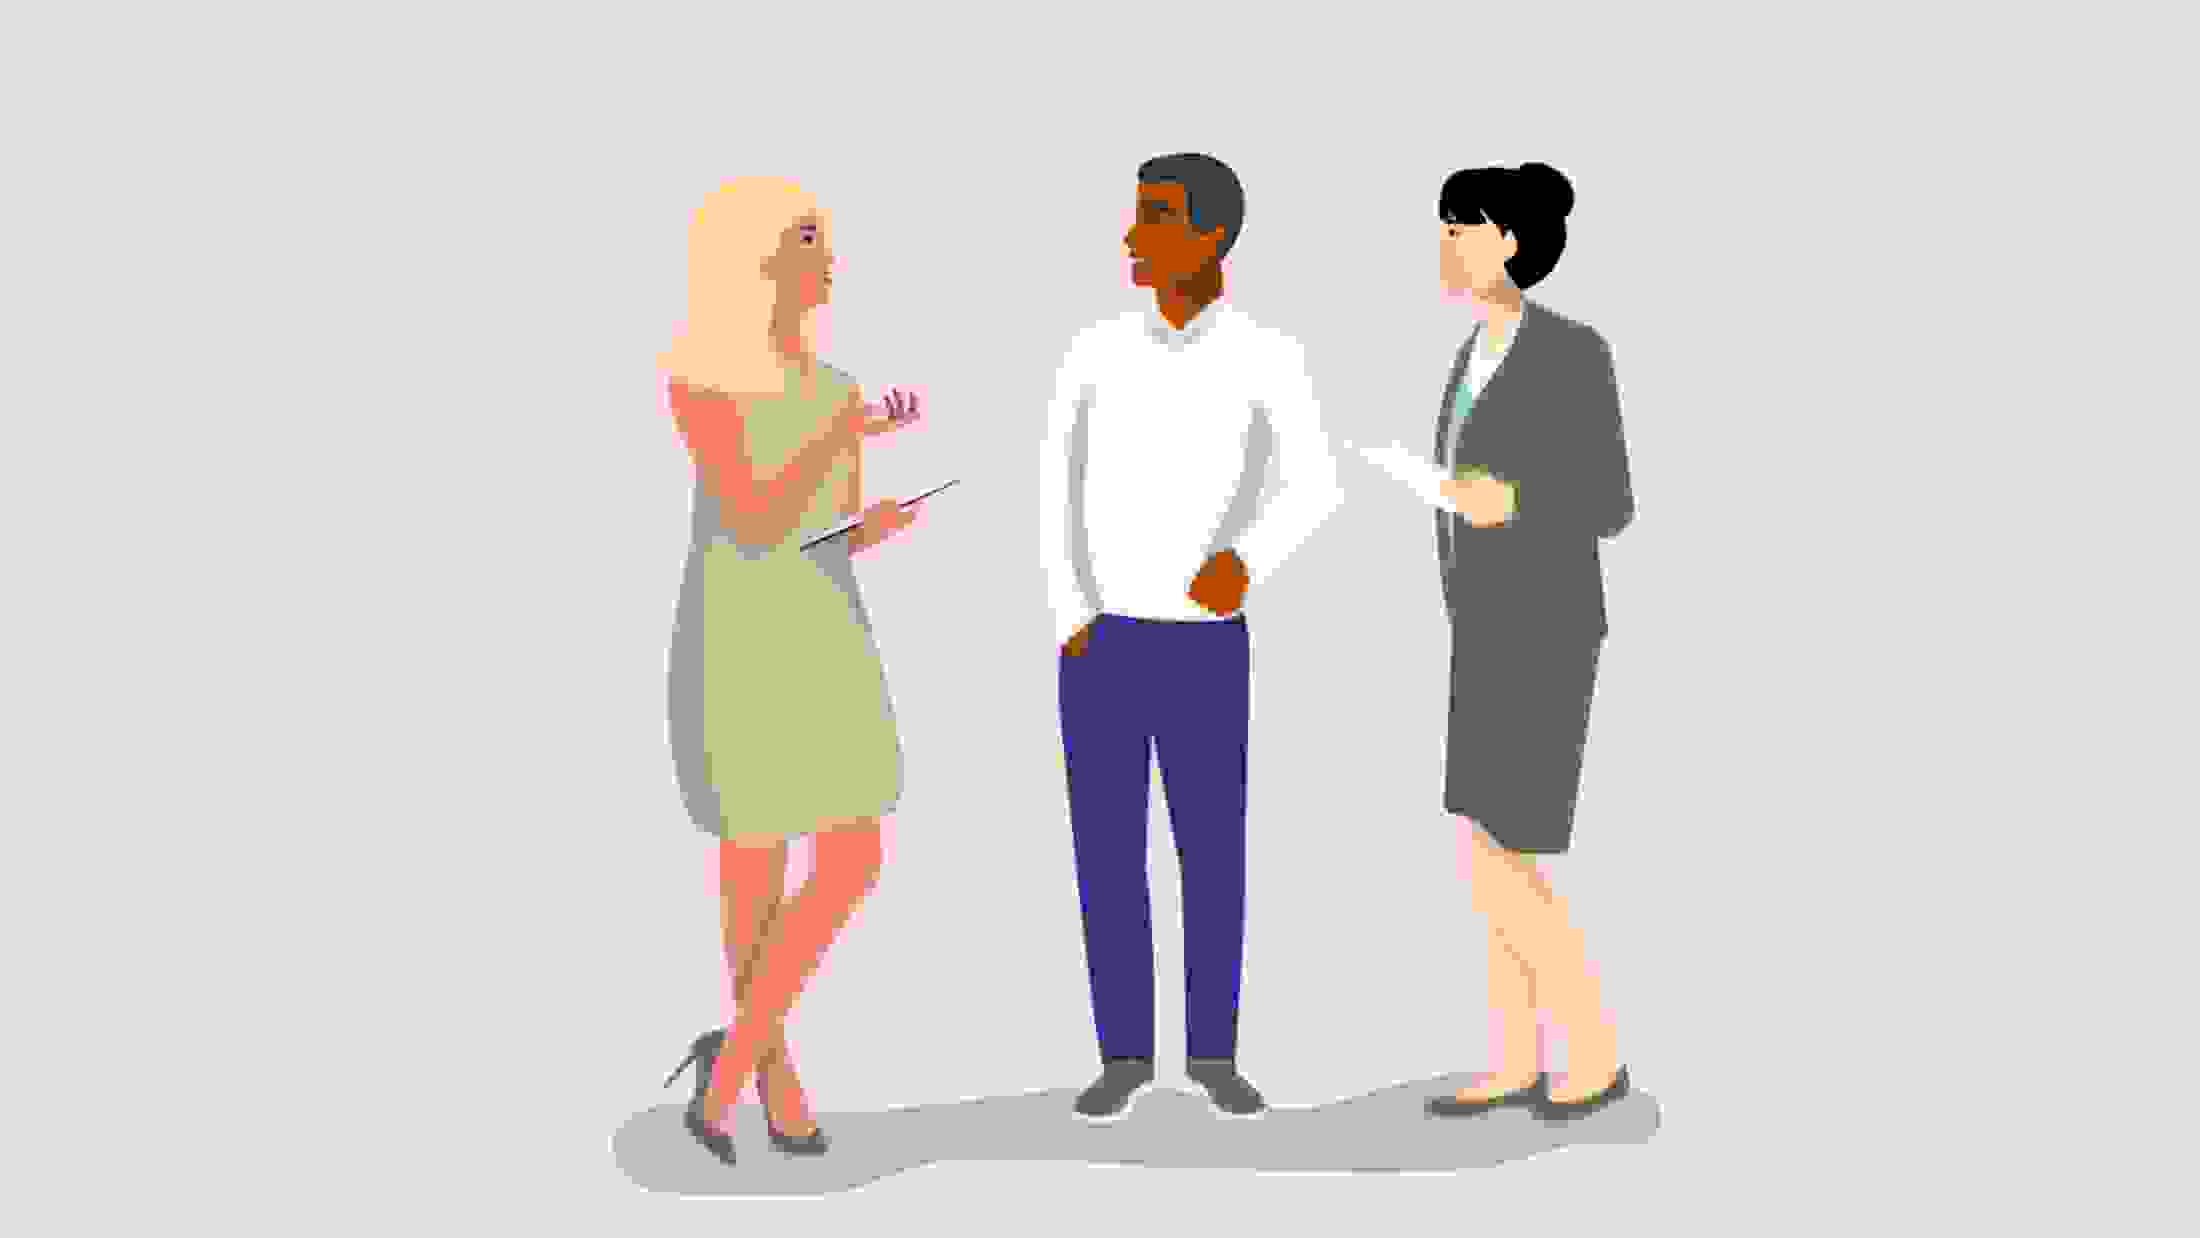 Illustration of three people, one man and two women, standing in front of a pink background. They appear to be having a conversation while holding papers and tablets